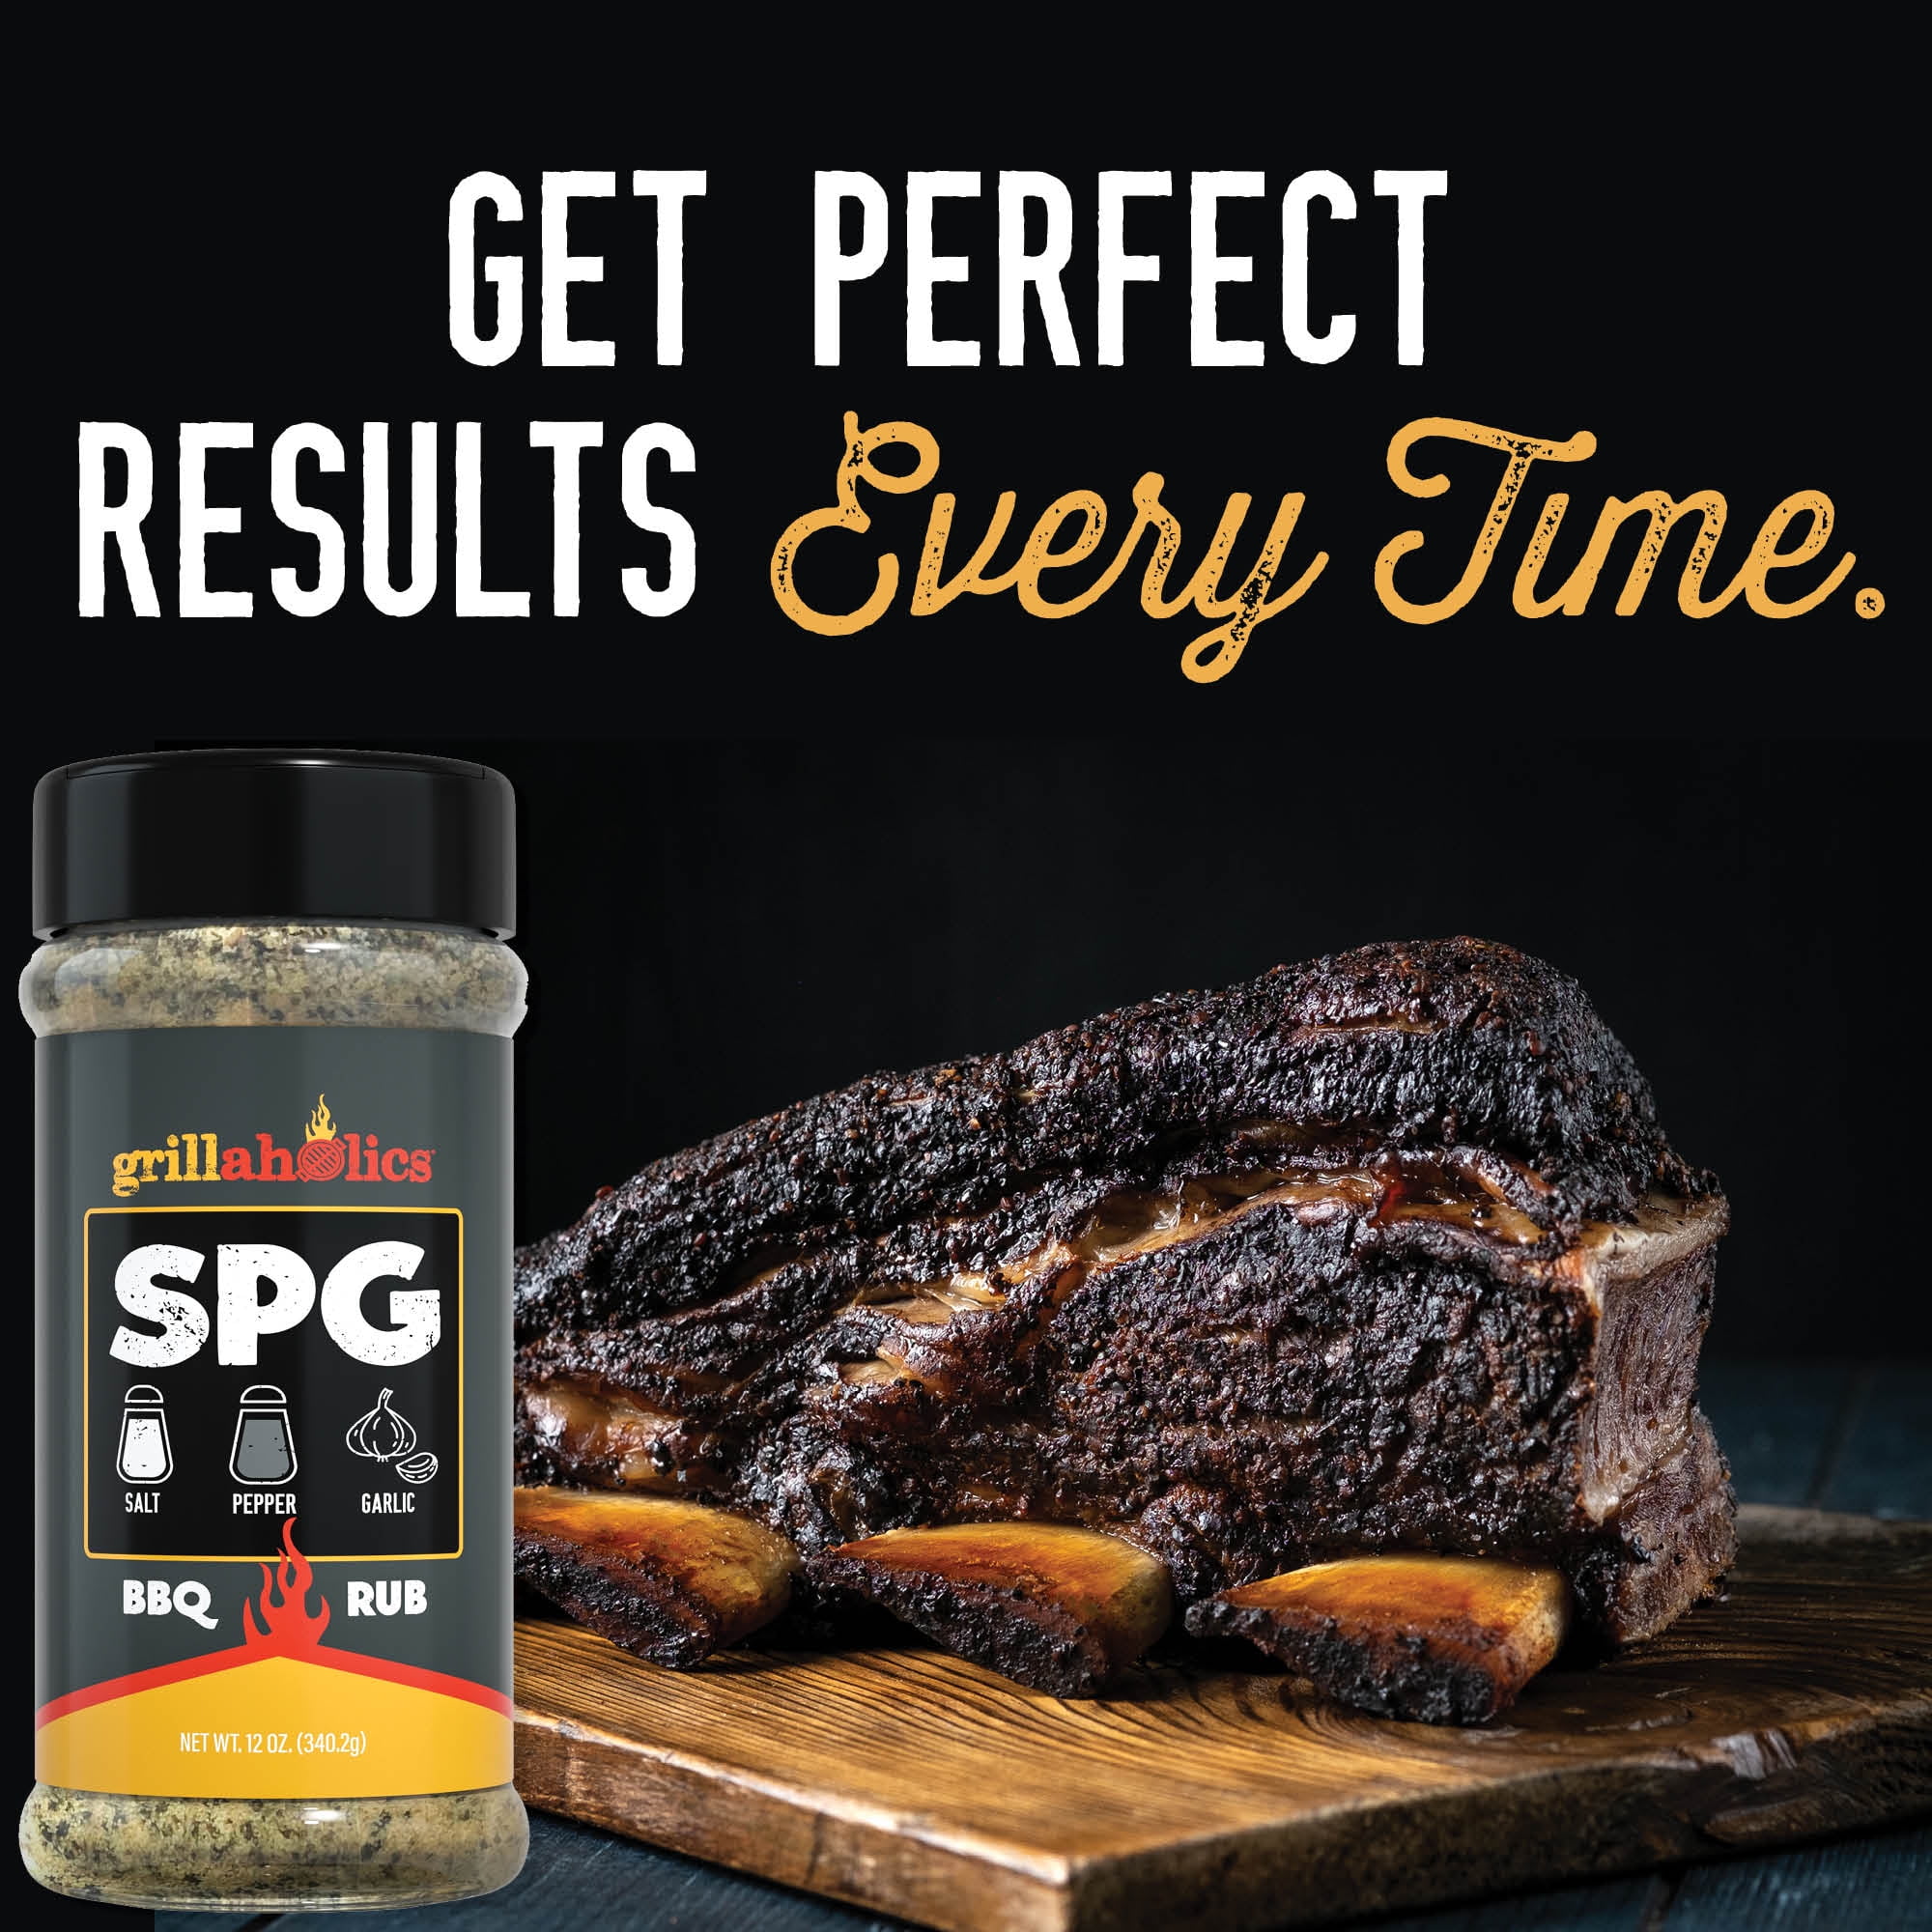 Griller All Purpose S.p.g. Rub | Flaps 20